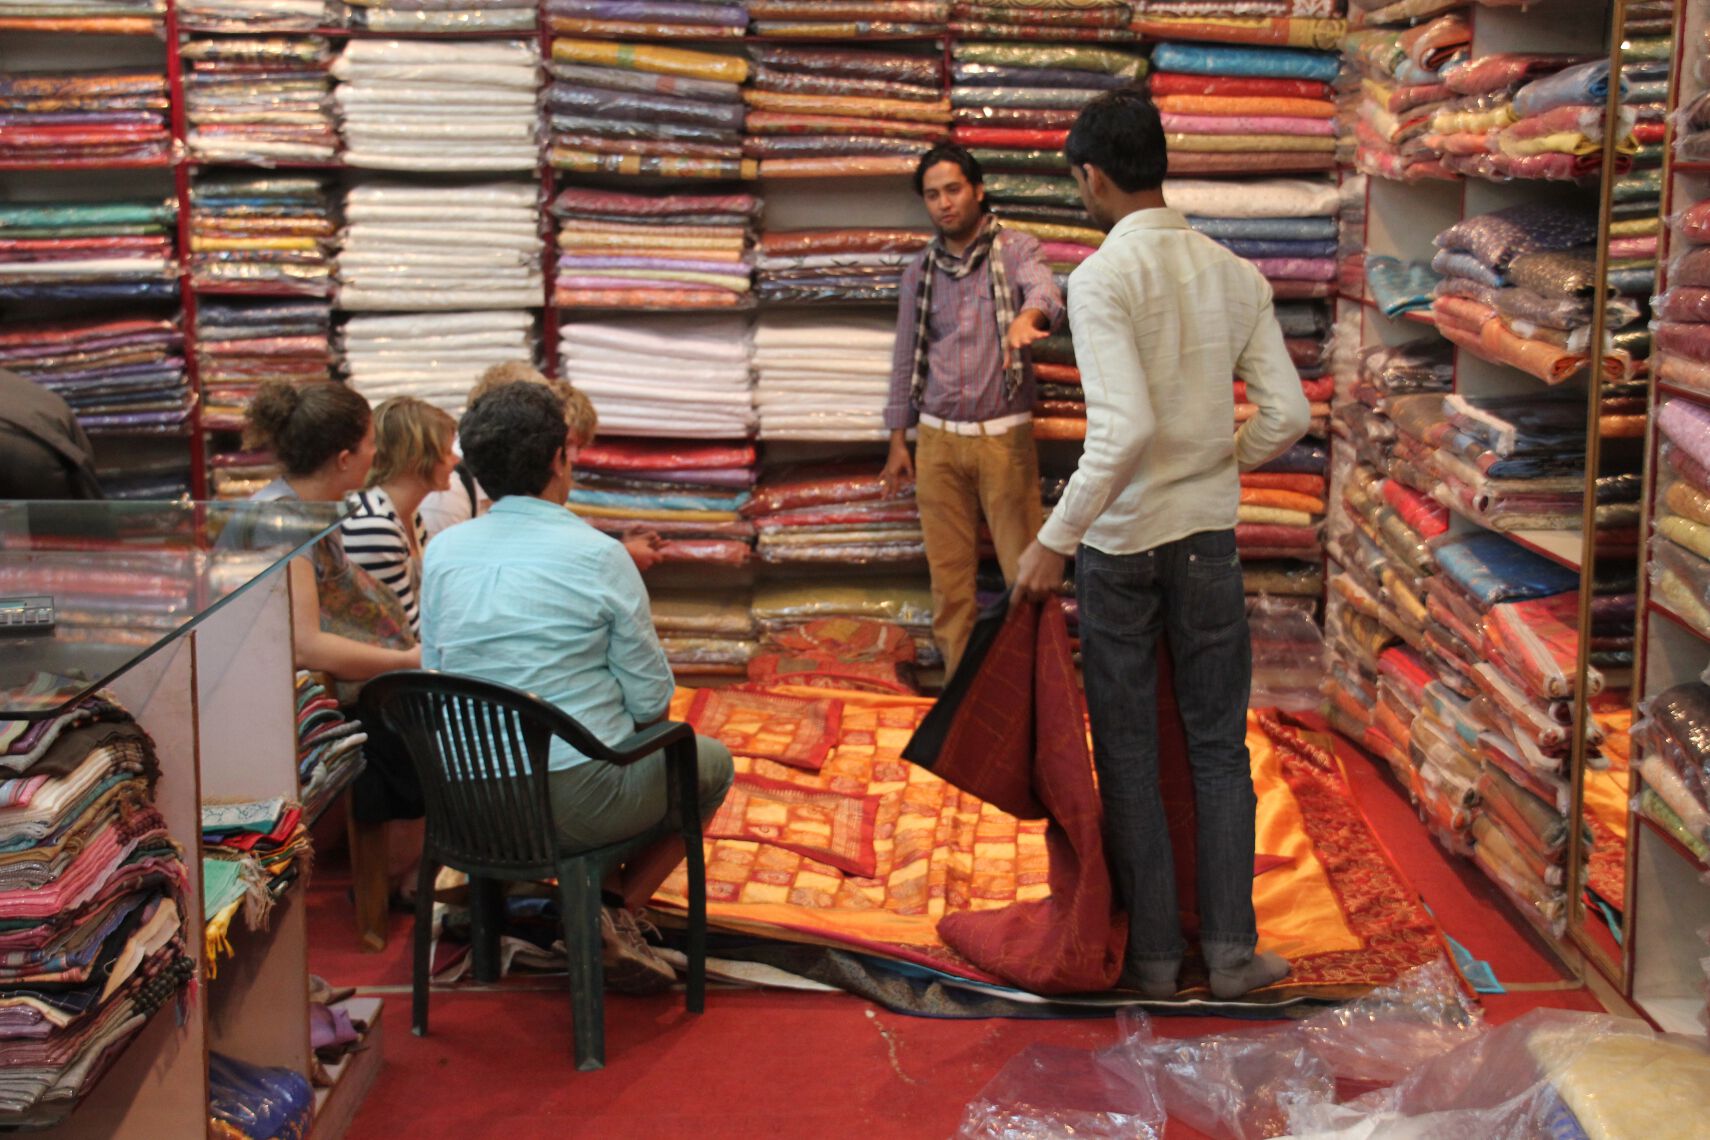 Tourists look at bed covers in a textiles shop in Jaipur, India.